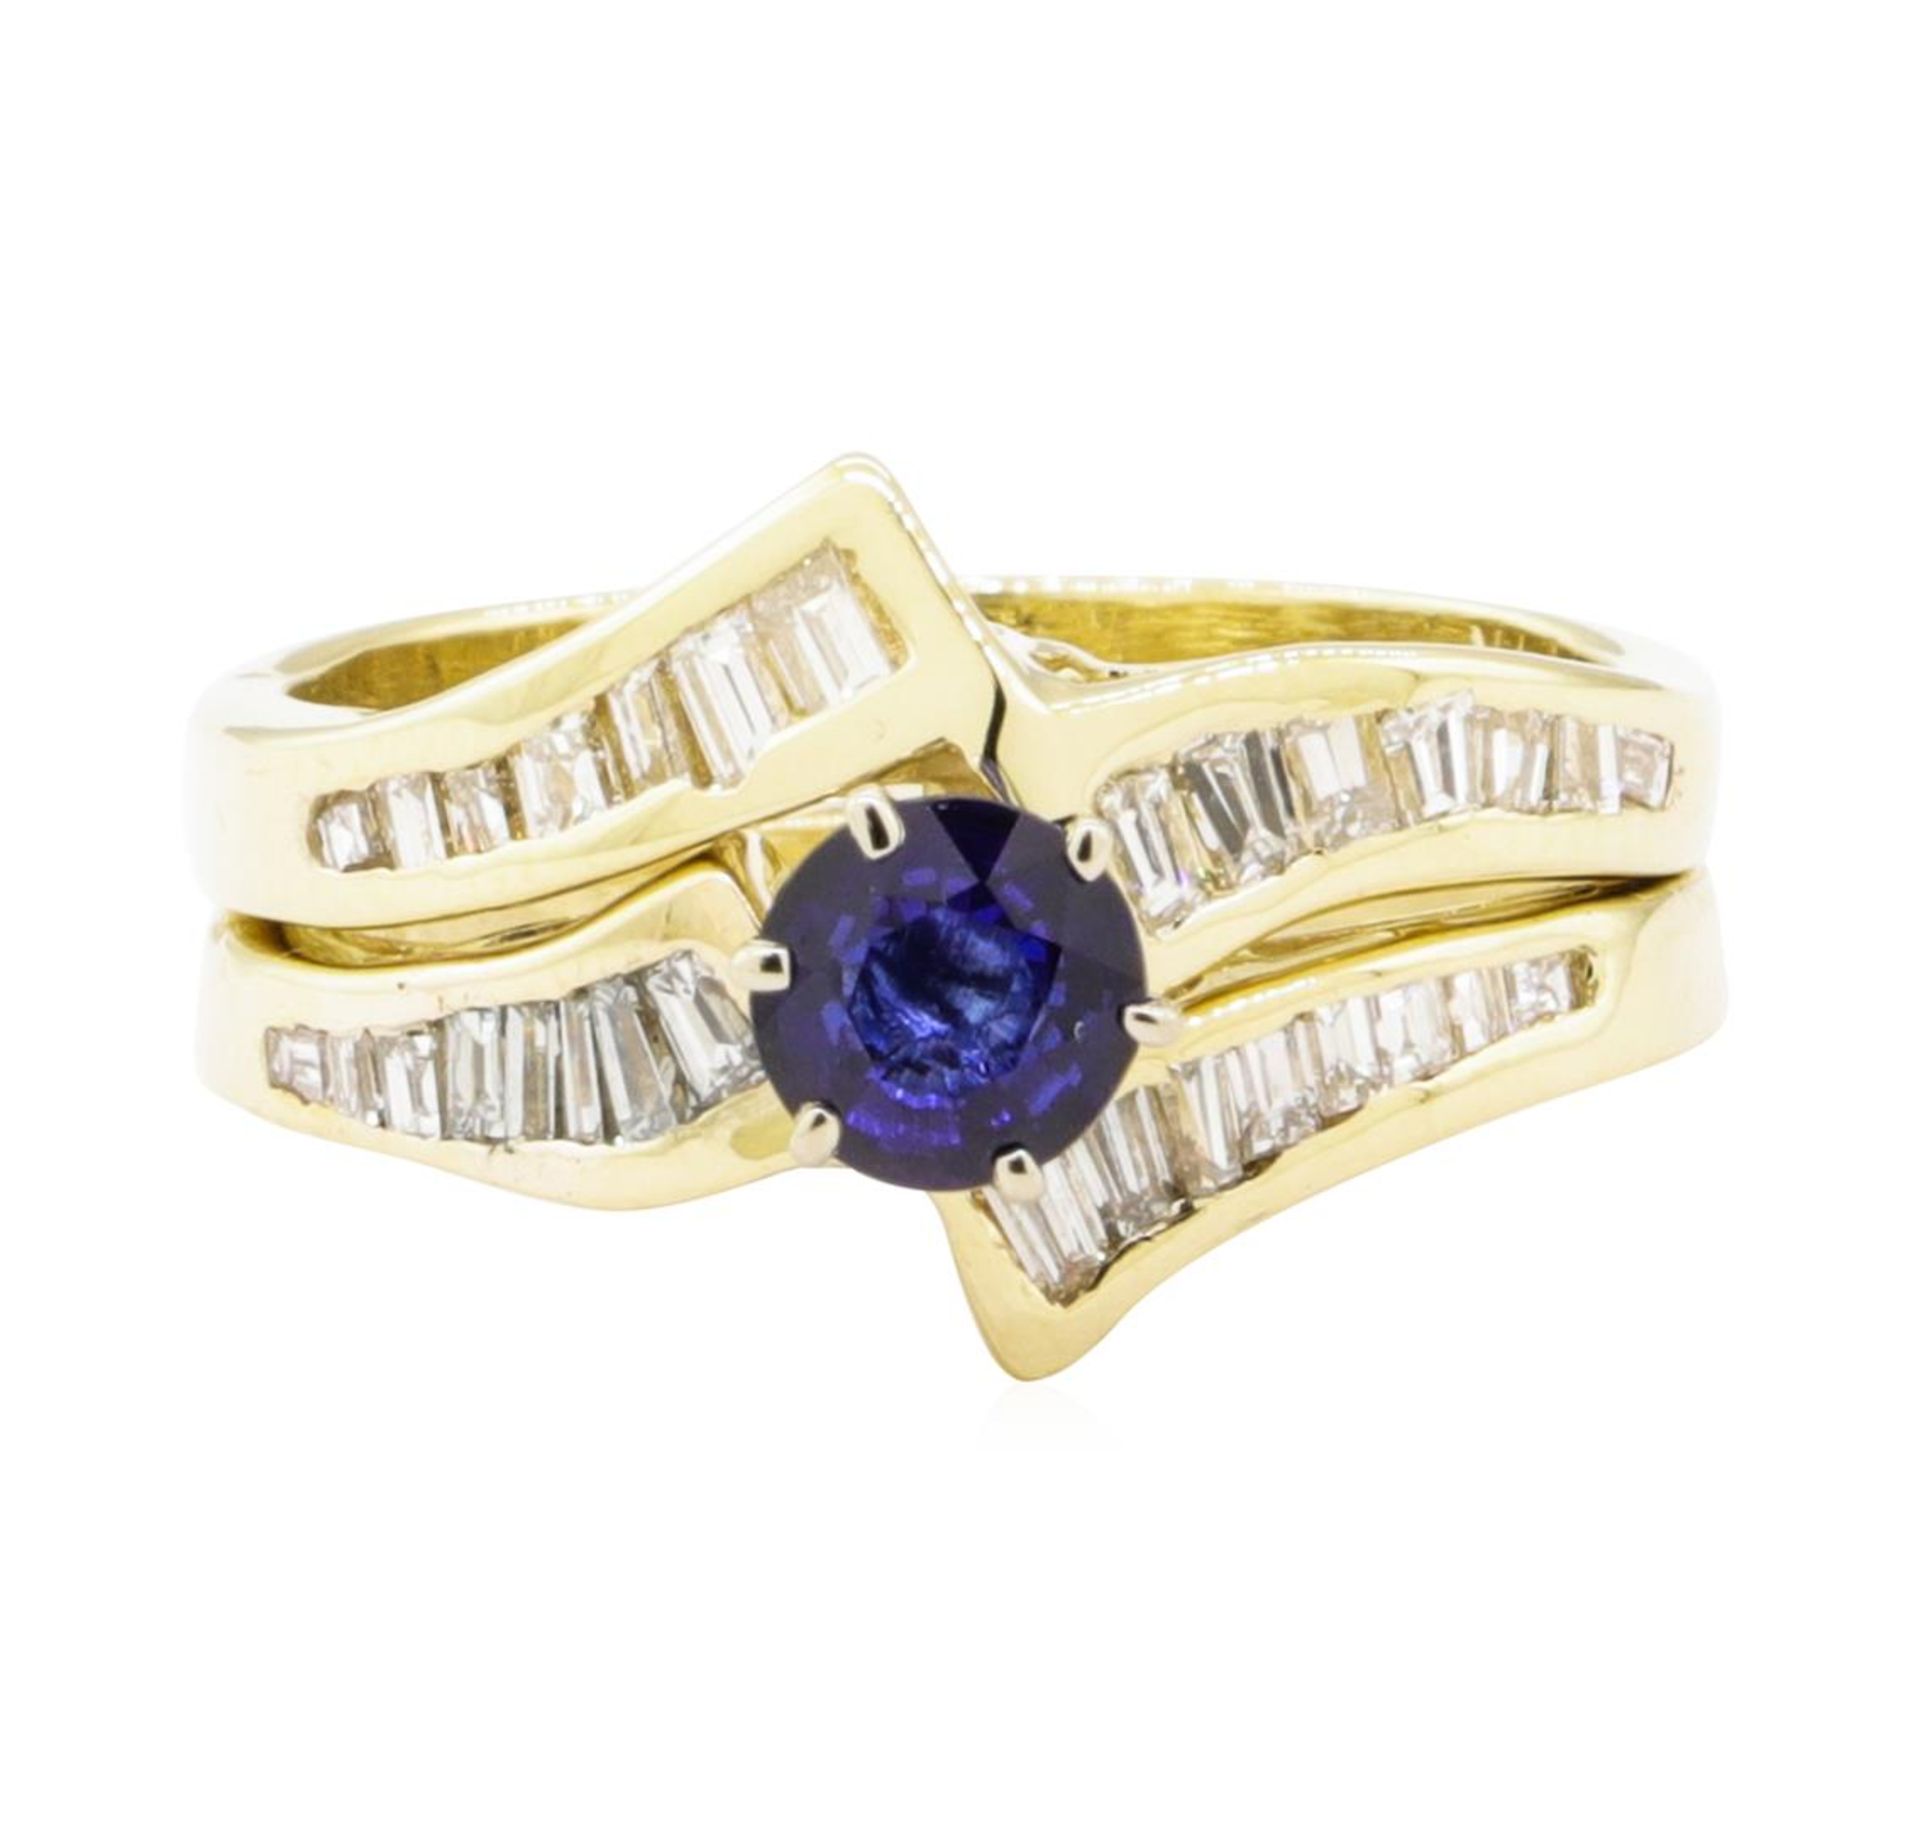 1.03 ctw Blue Sapphire And Diamond Ring And Band - 14KT Yellow Gold - Image 2 of 4